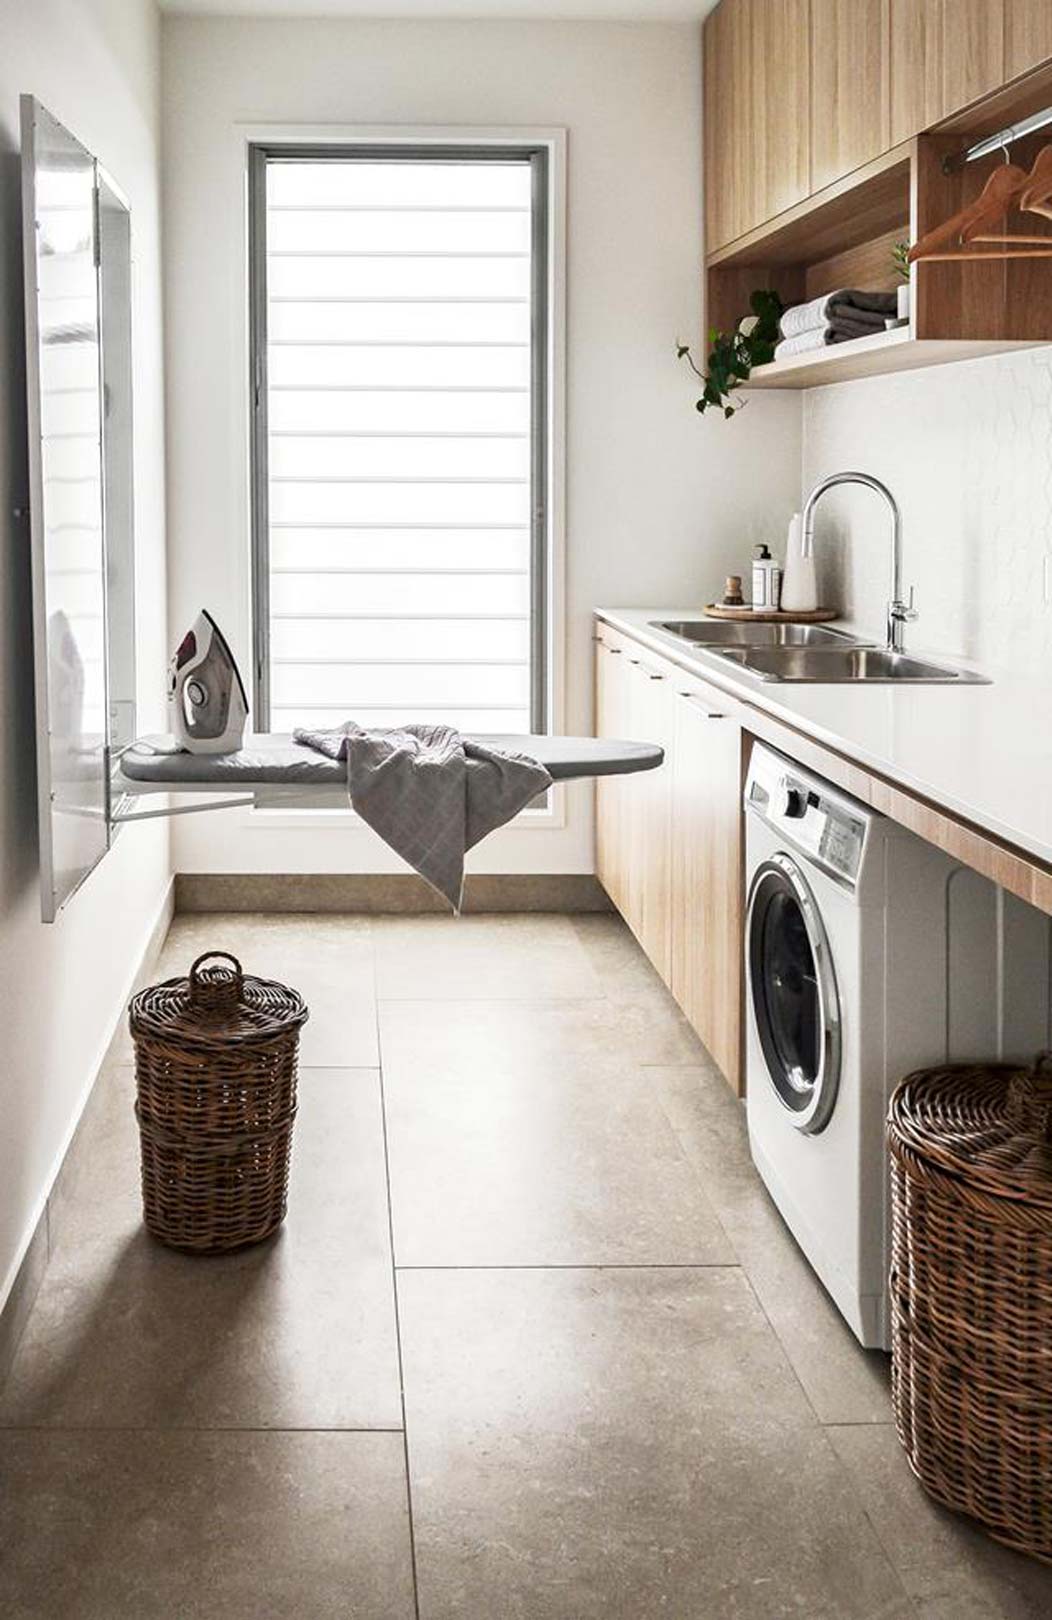 DIY small laundry room ideas include keeping your laundry tidy and a fold out hidden ironing board